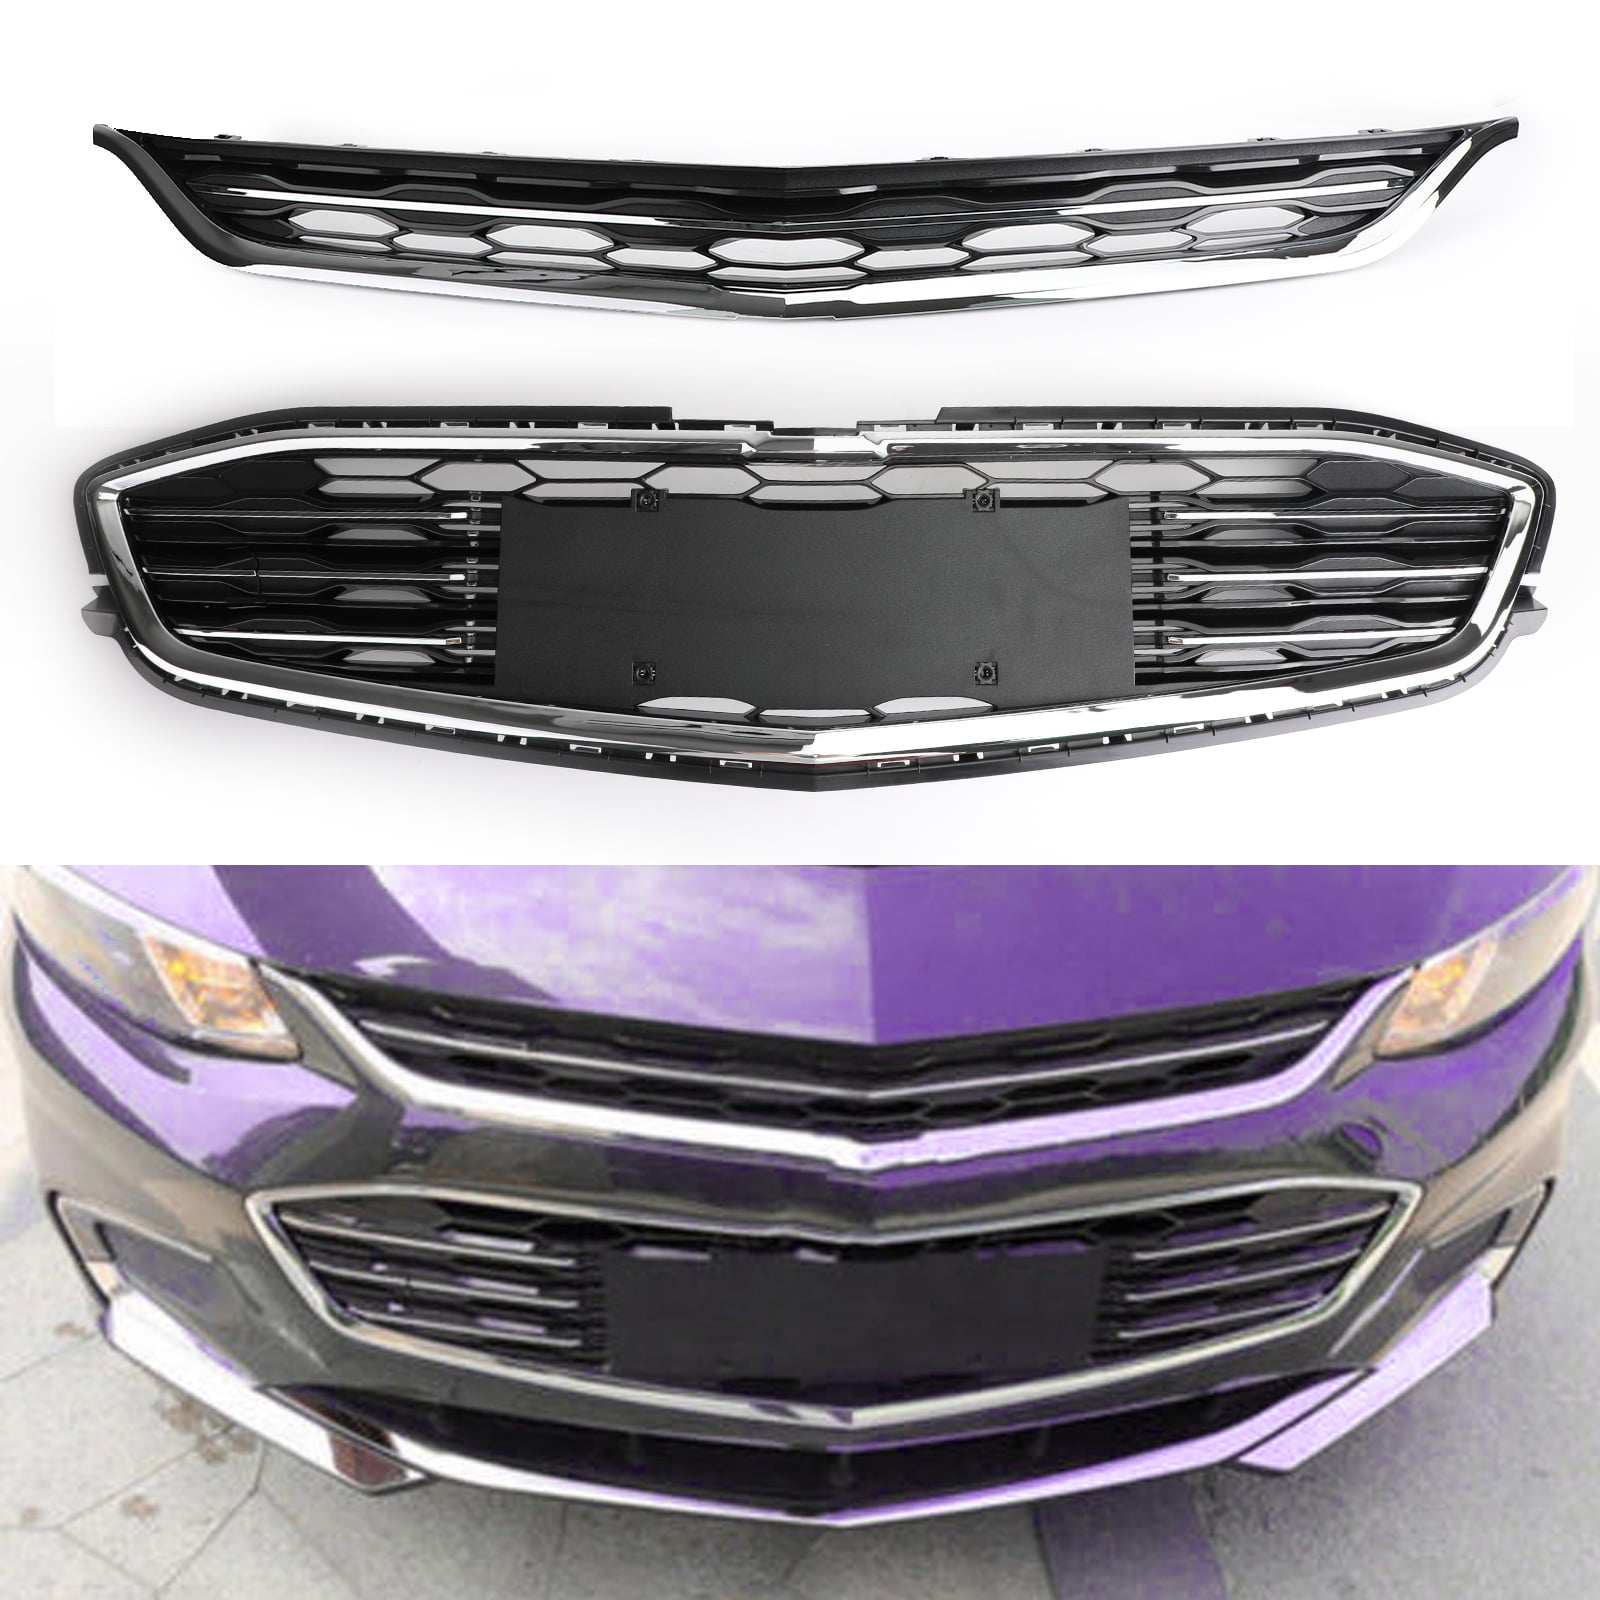 08-12 CHEVY MALIBU FRONT UPPER BUMPER LOWER MESH WIRE GRILLE GRILL COMBO CHROME 